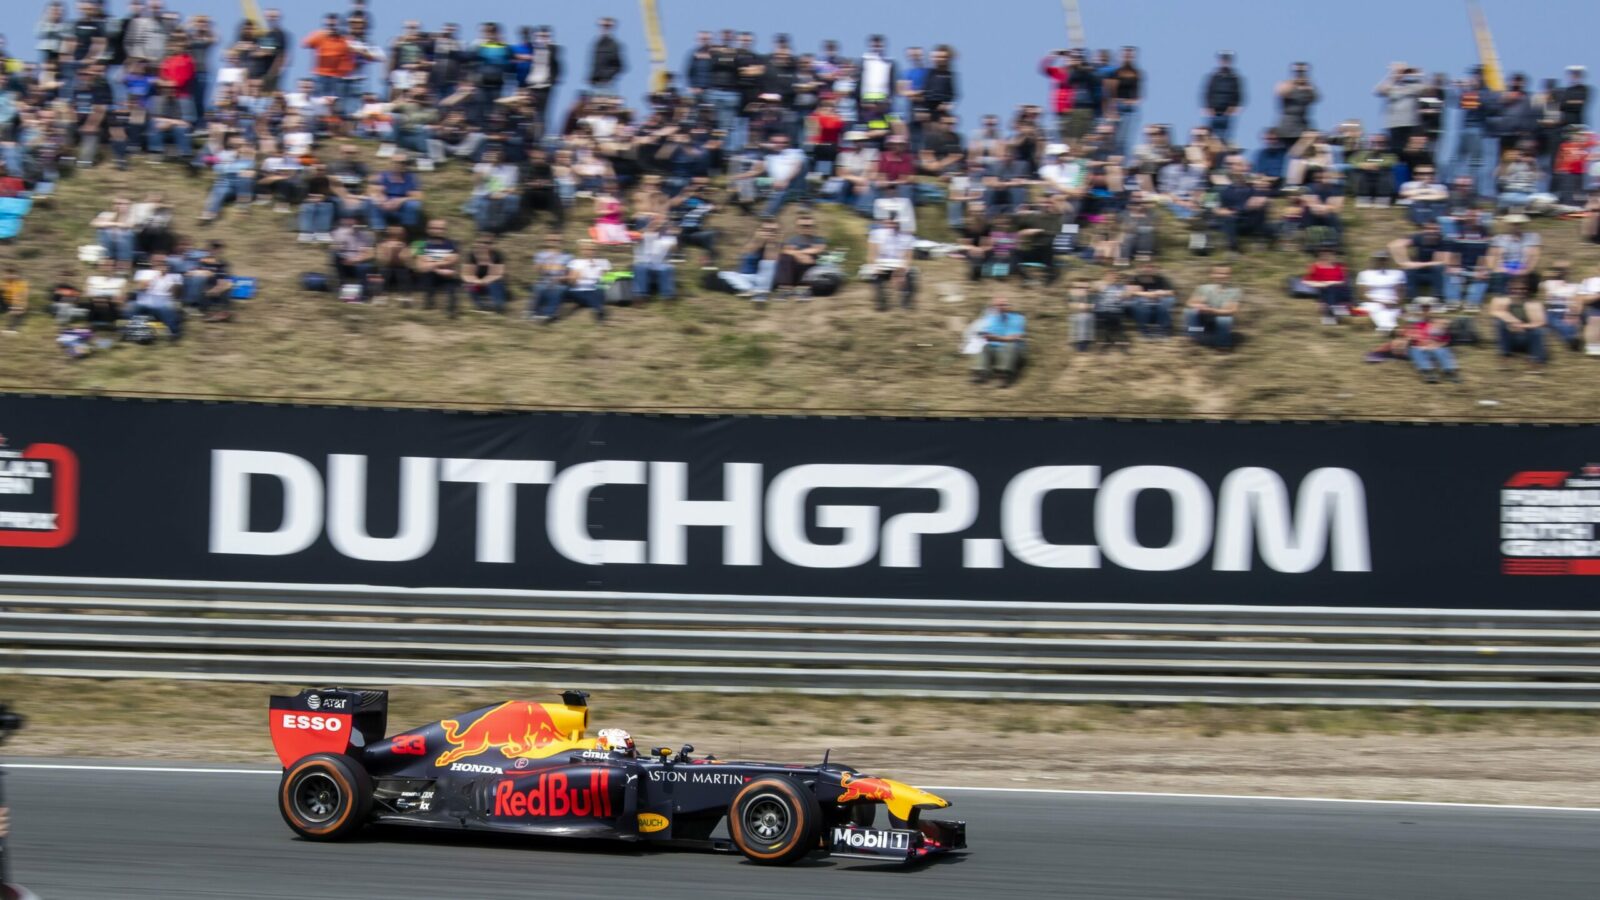 Netherlands Grand Prix takes place